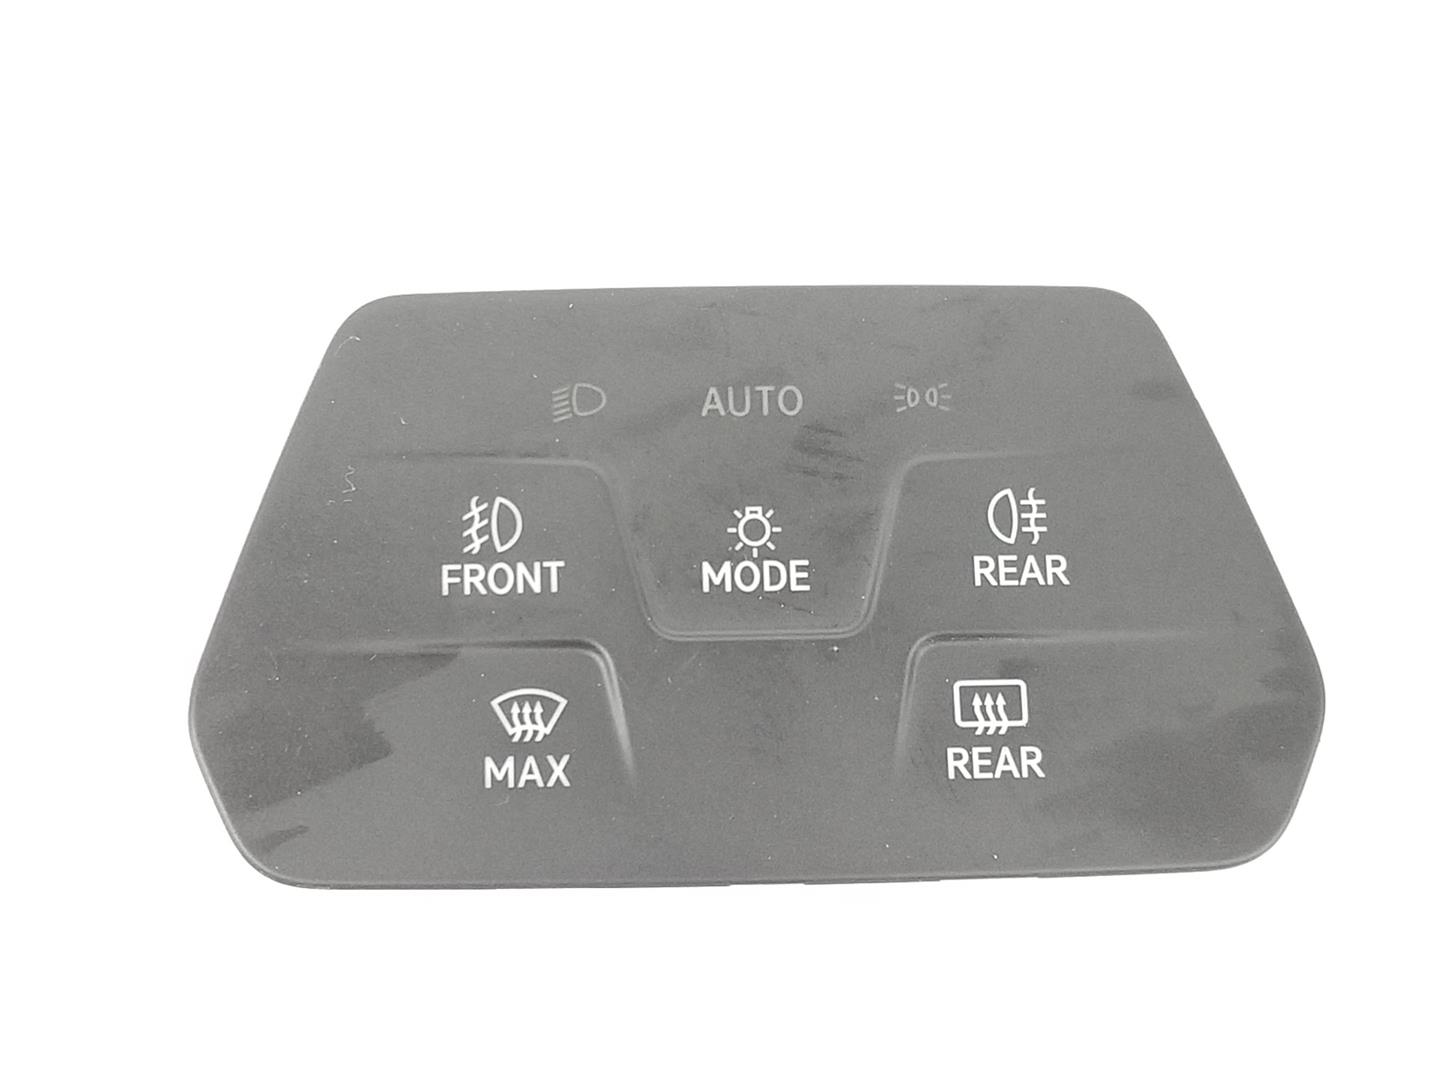 SEAT Alhambra 2 generation (2010-2021) Other Control Units 5H0941193AG, 5H0941193AG 19879430